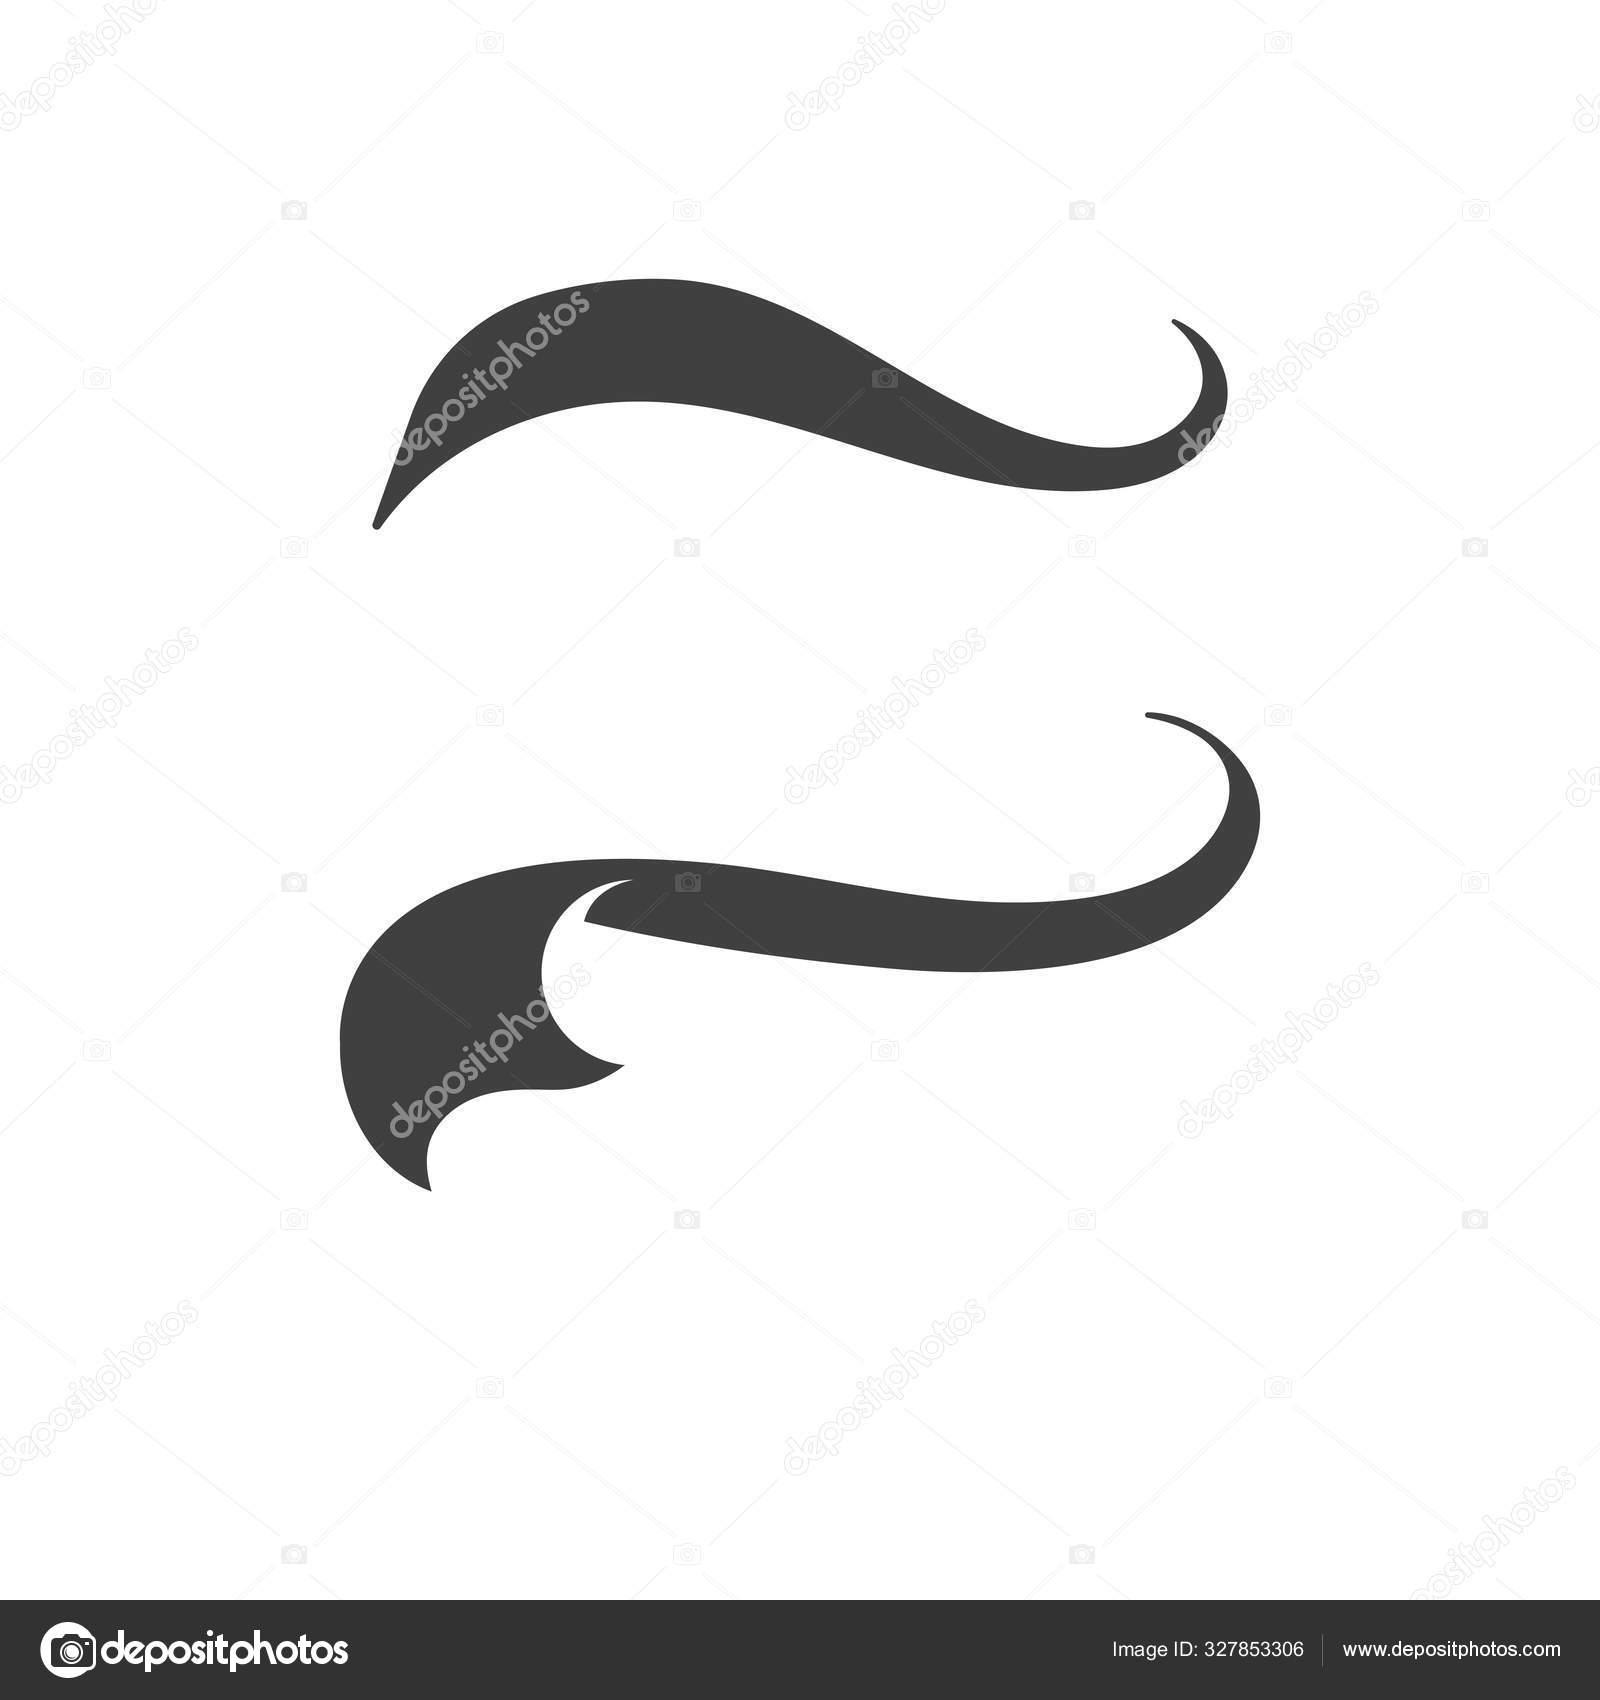 Swash and swooshes tails design Royalty Free Vector Image